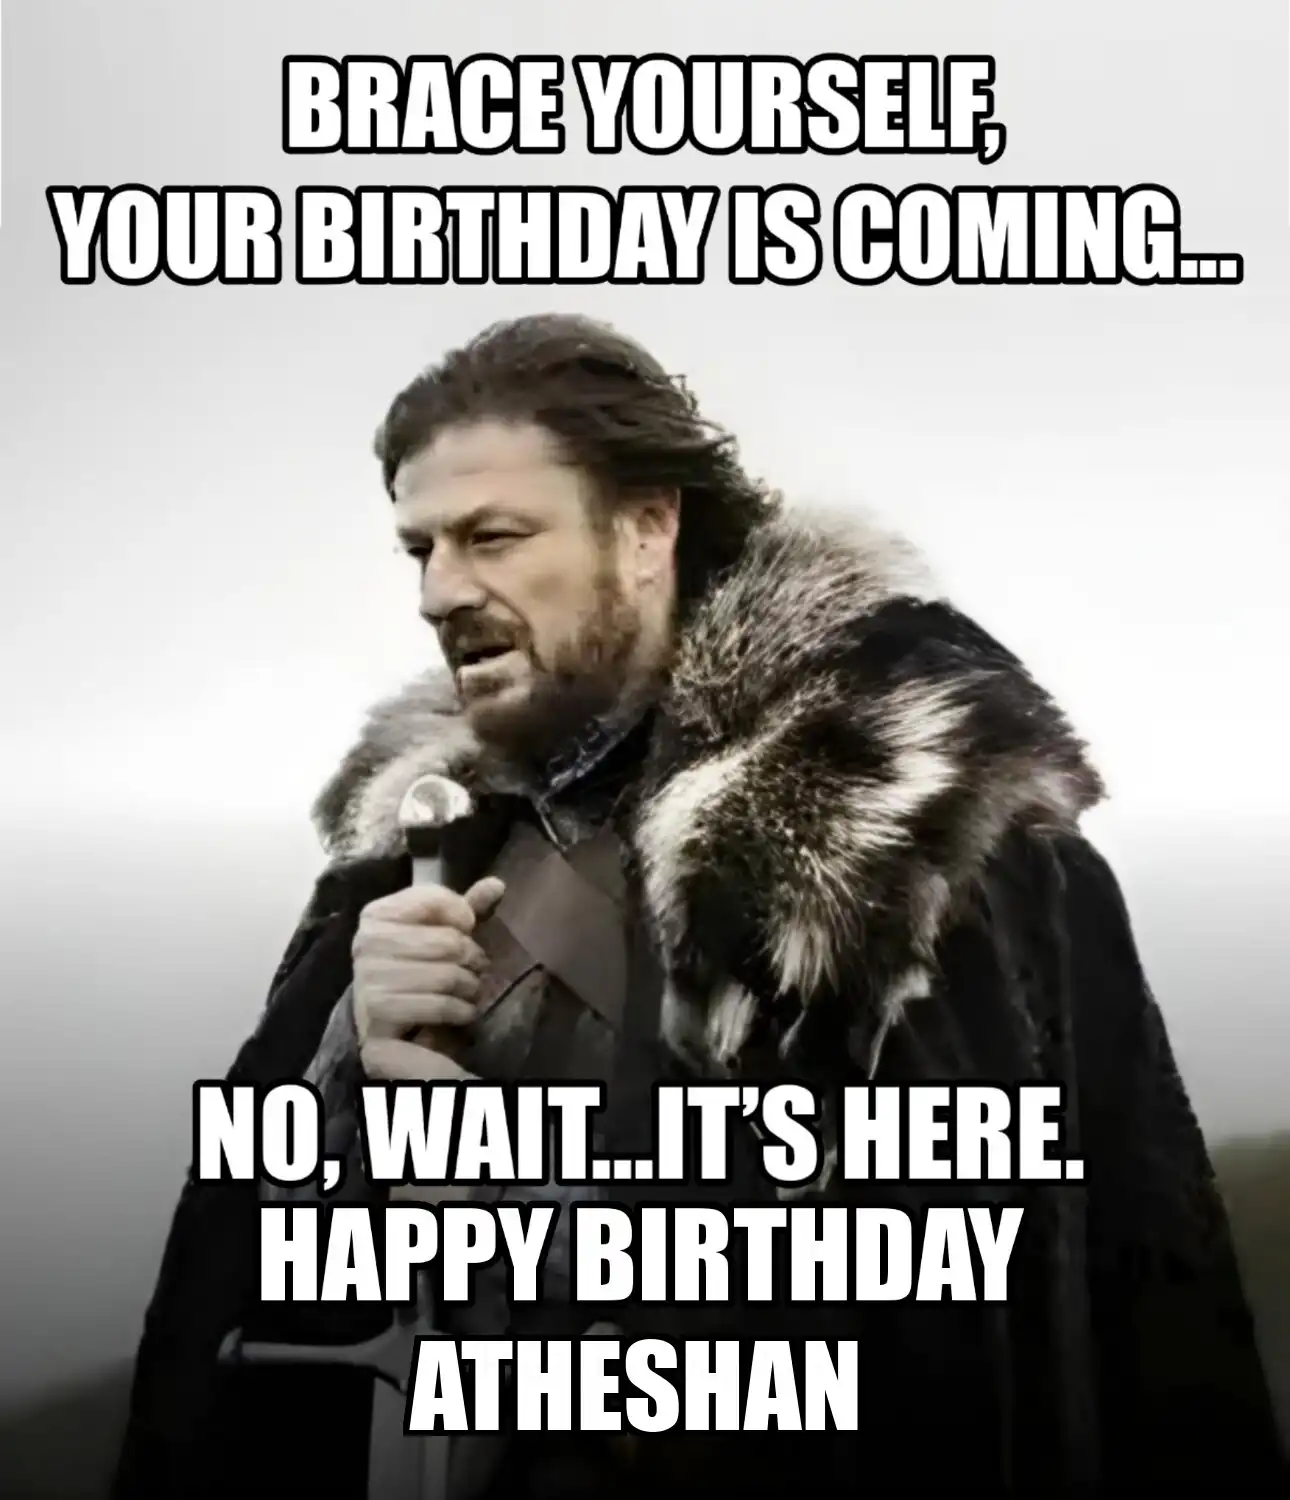 Happy Birthday Atheshan Brace Yourself Your Birthday Is Coming Meme